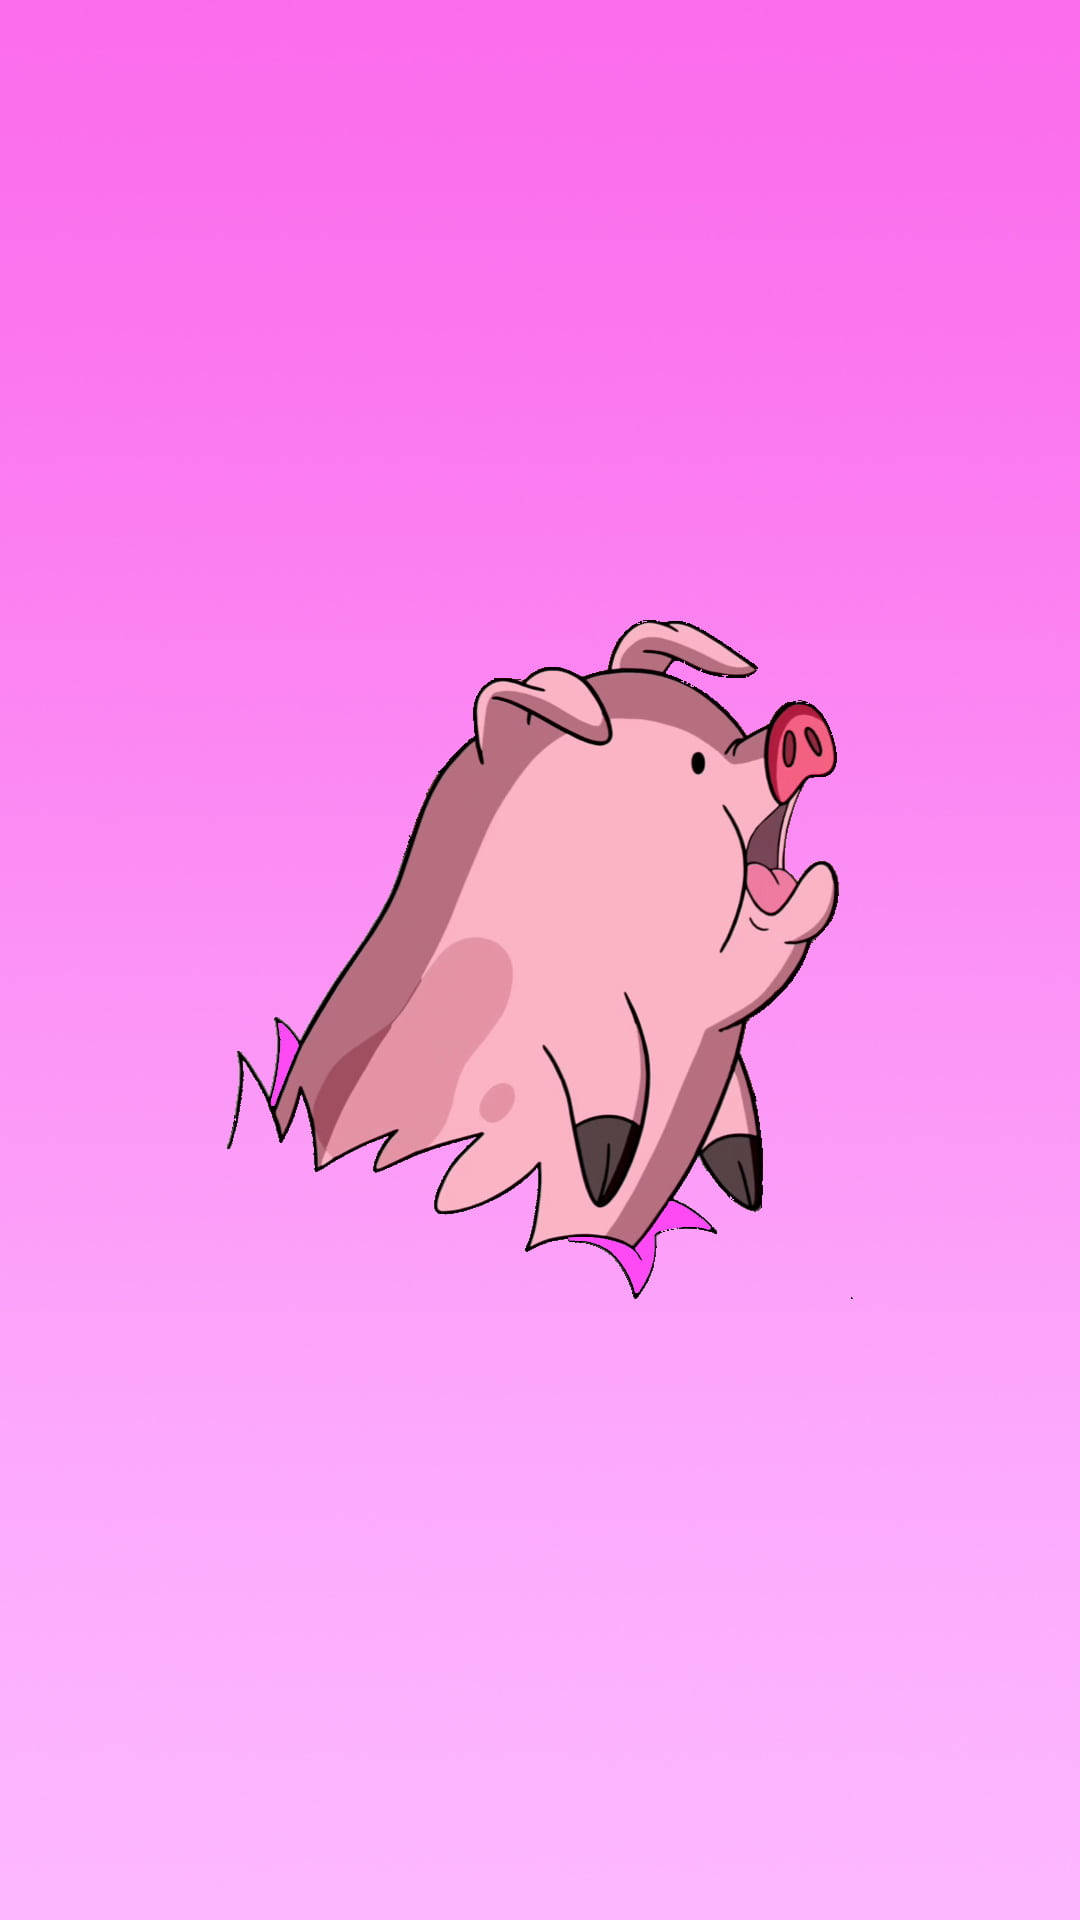 Popped-out Waddles Digital Art Wallpaper